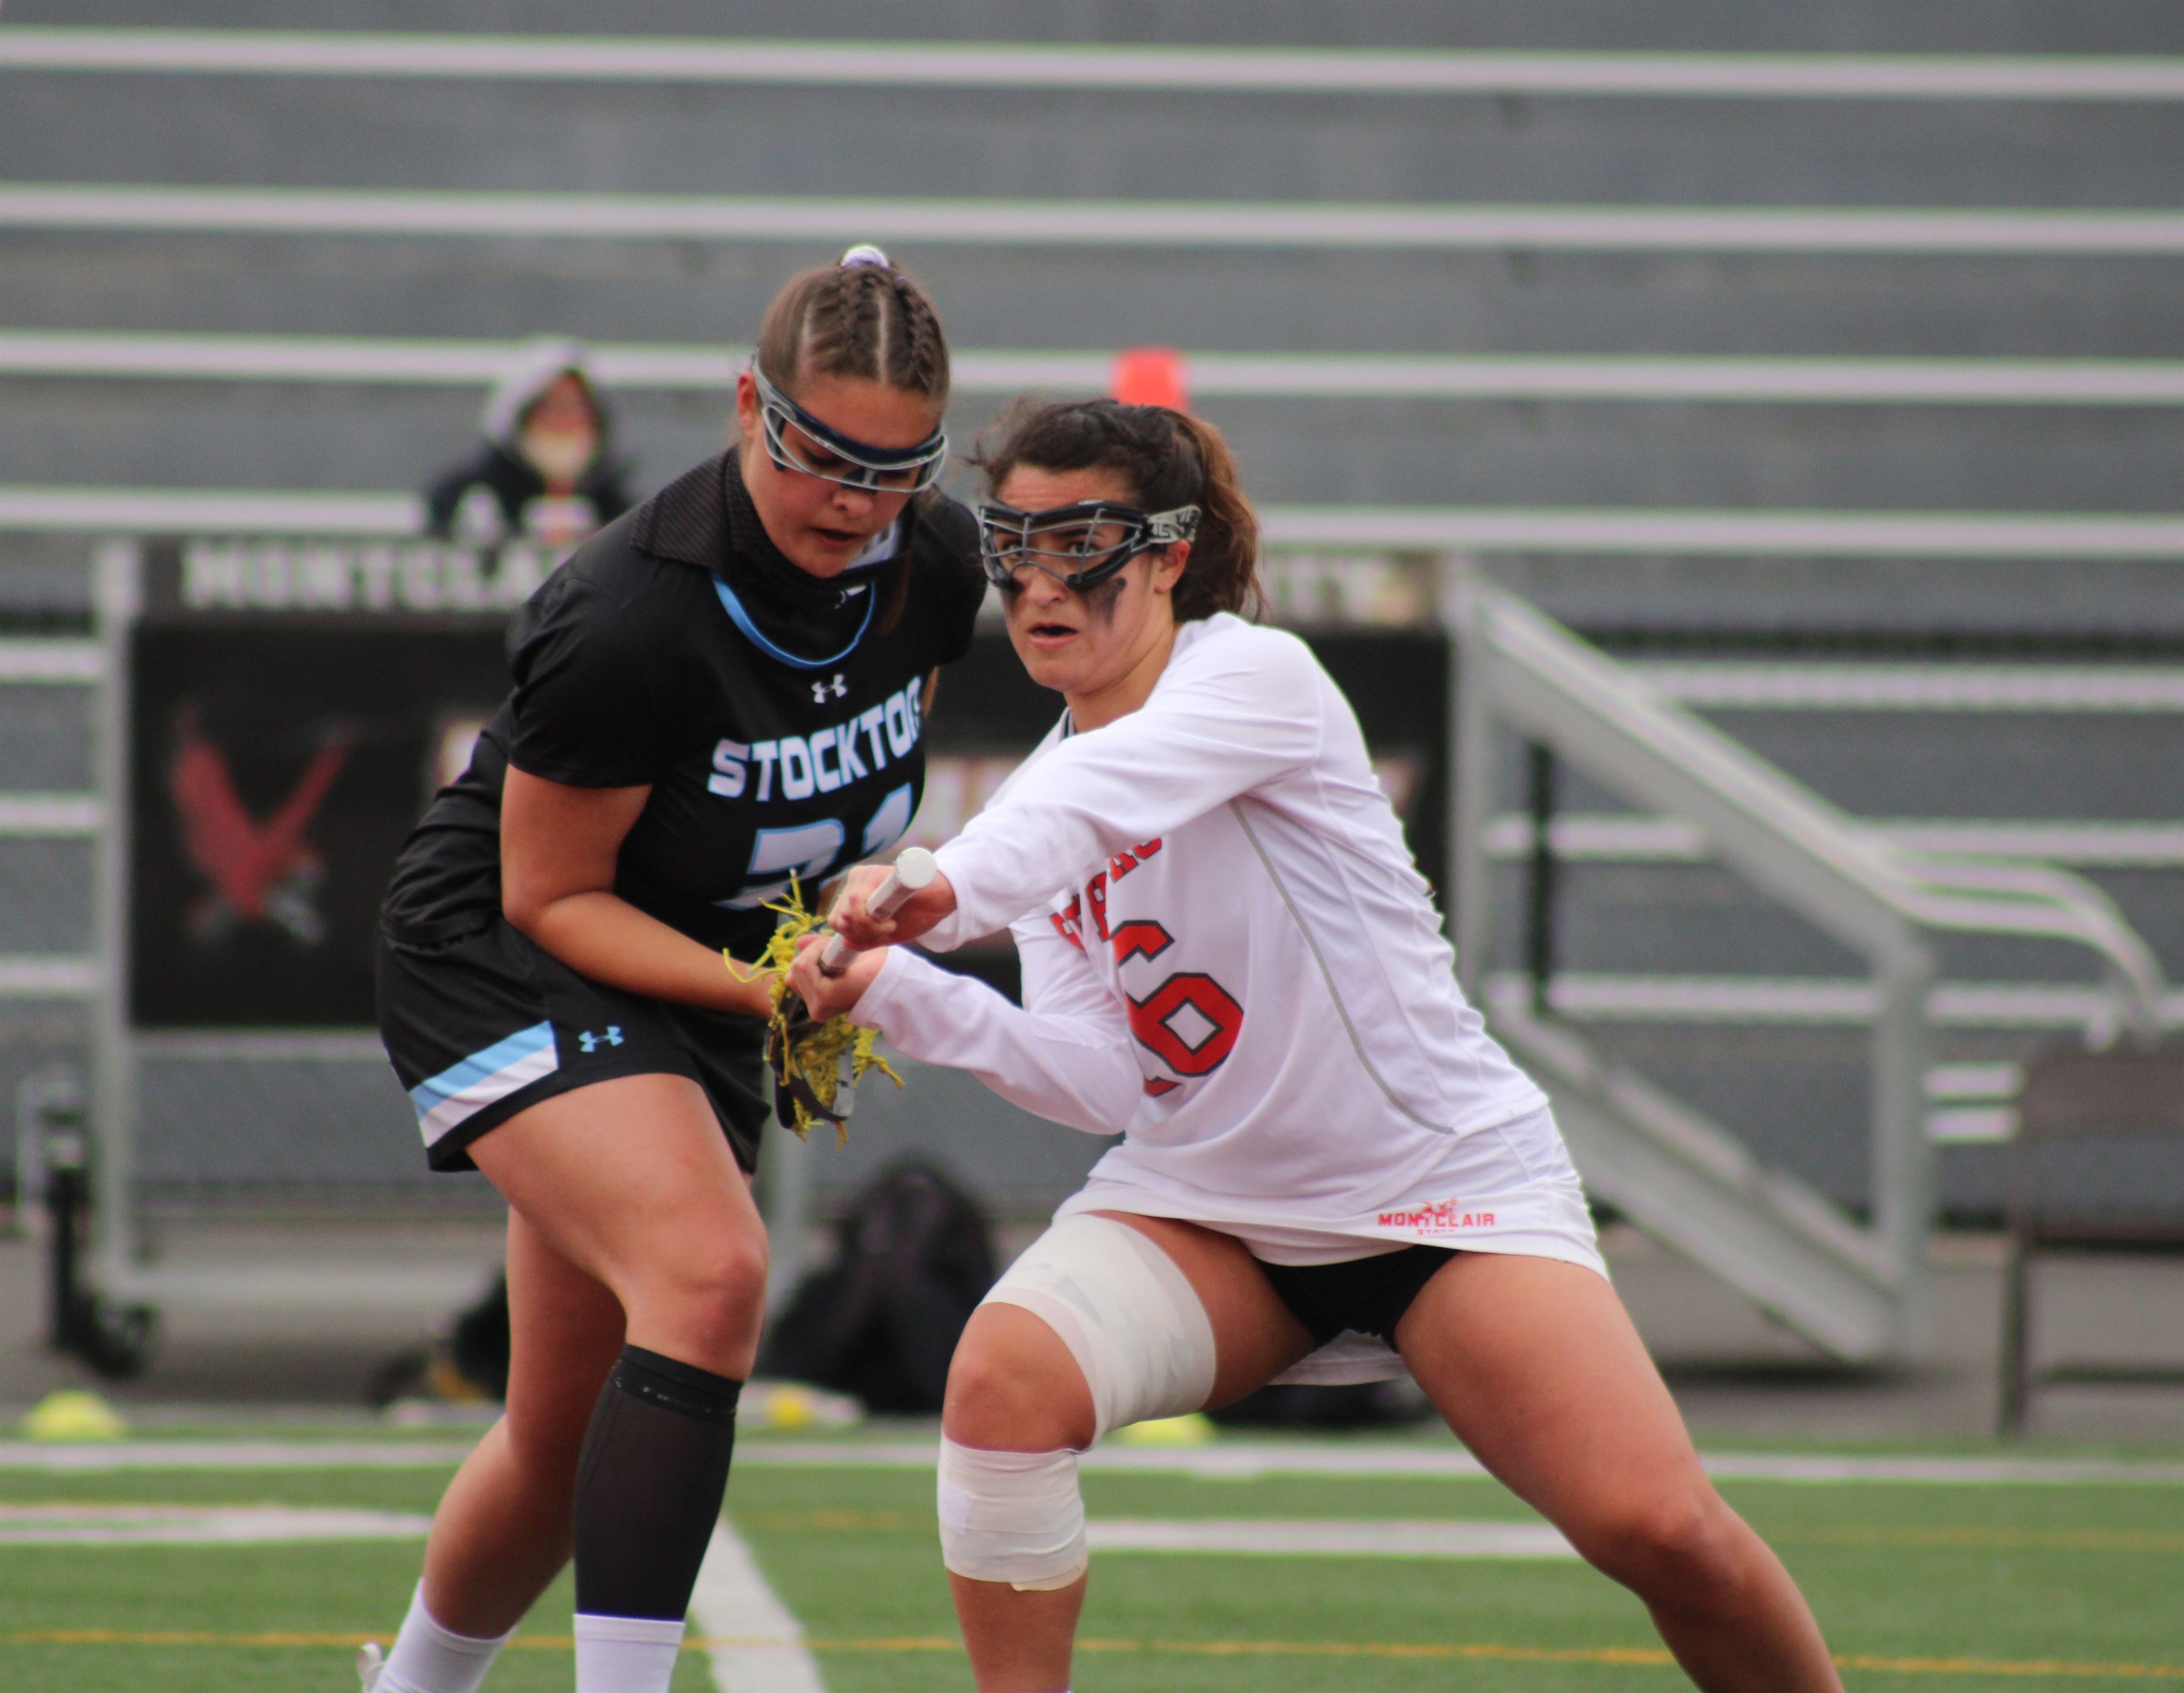 Junior midfielder Amber Gonzales scored four goals in the Red Hawks historic victory over Stockton. Corey Annan | The Montclarion